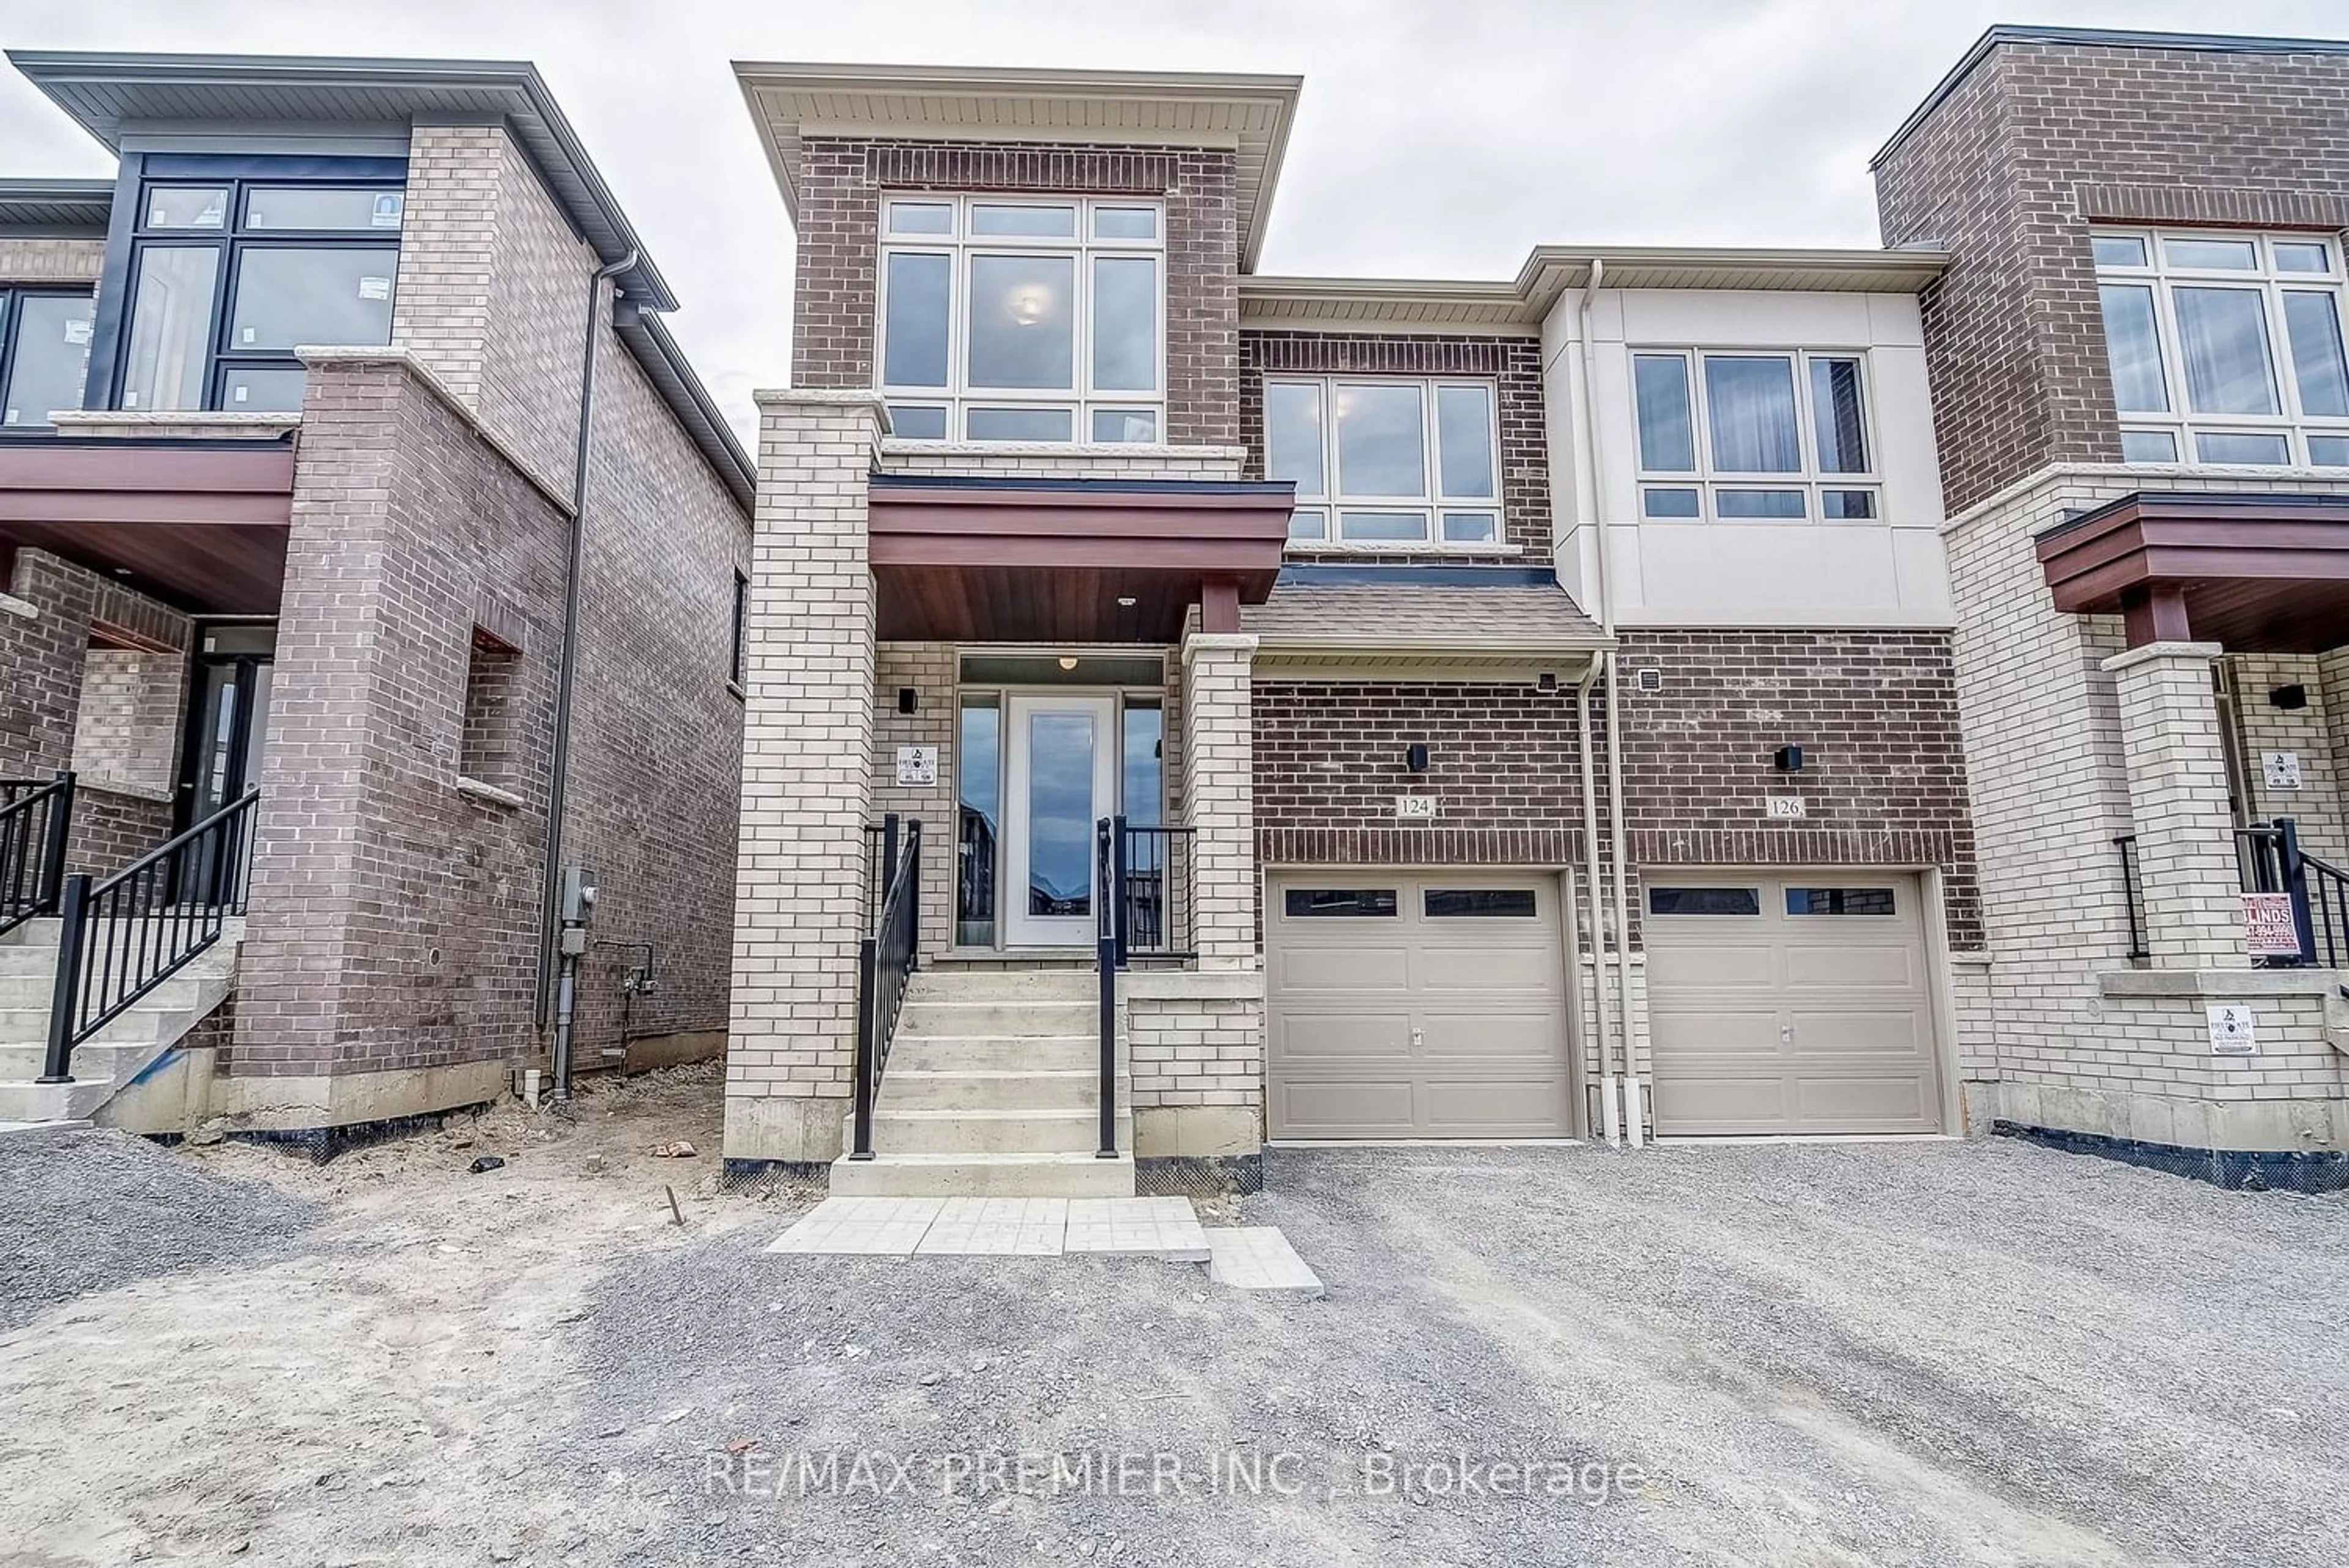 Home with brick exterior material for 124 Armilia Pl, Whitby Ontario L1P 0P7